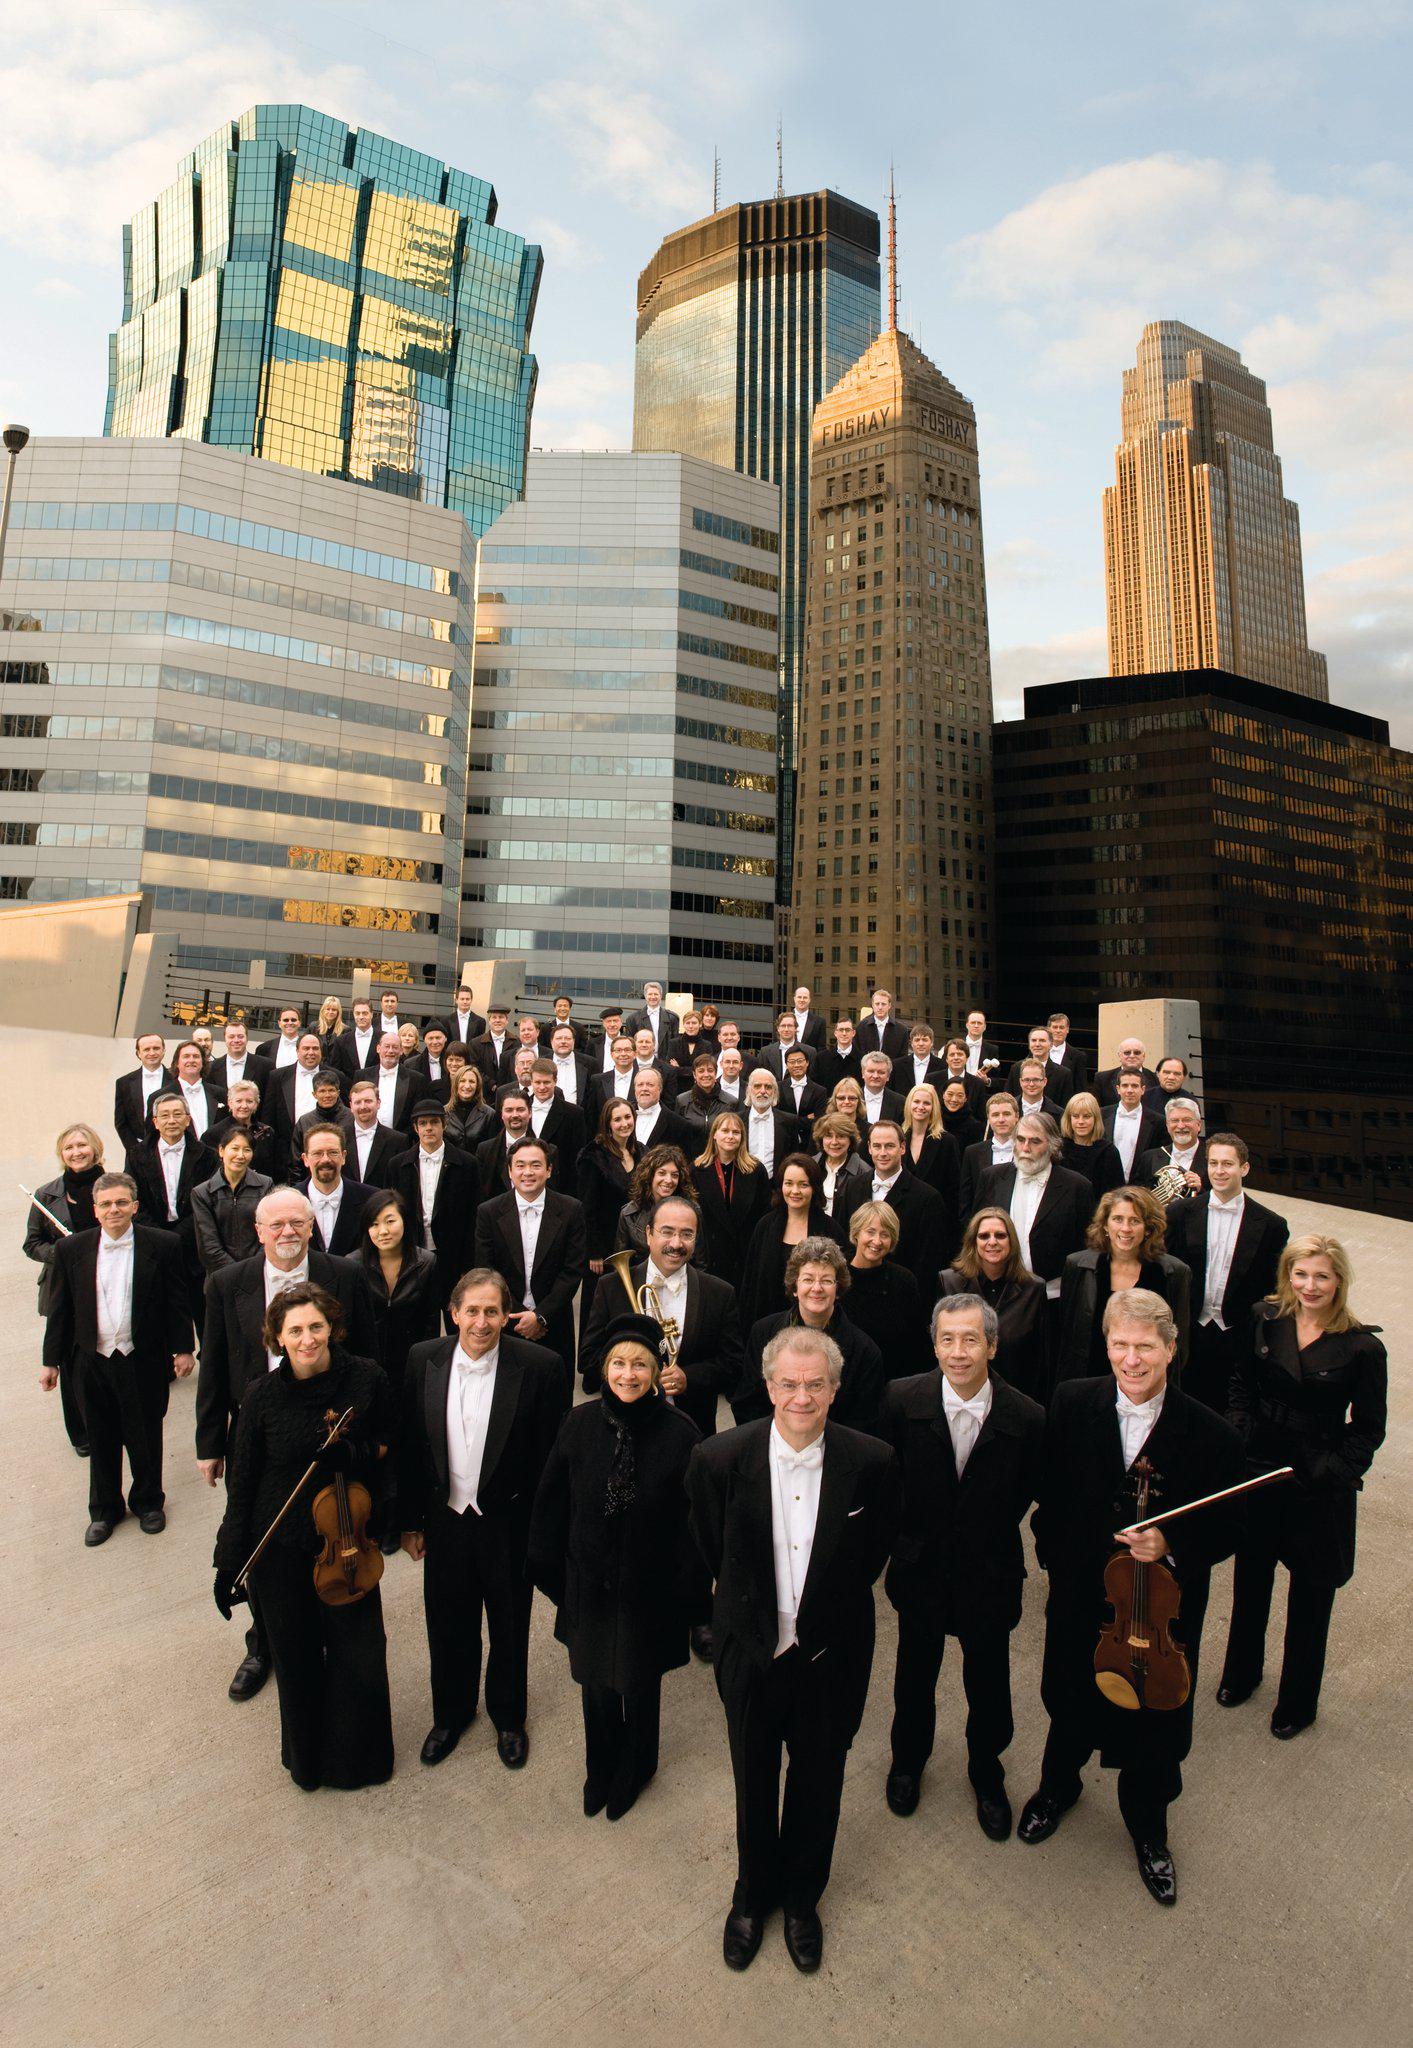 Minnesota Orchestra at Orchestra Hall